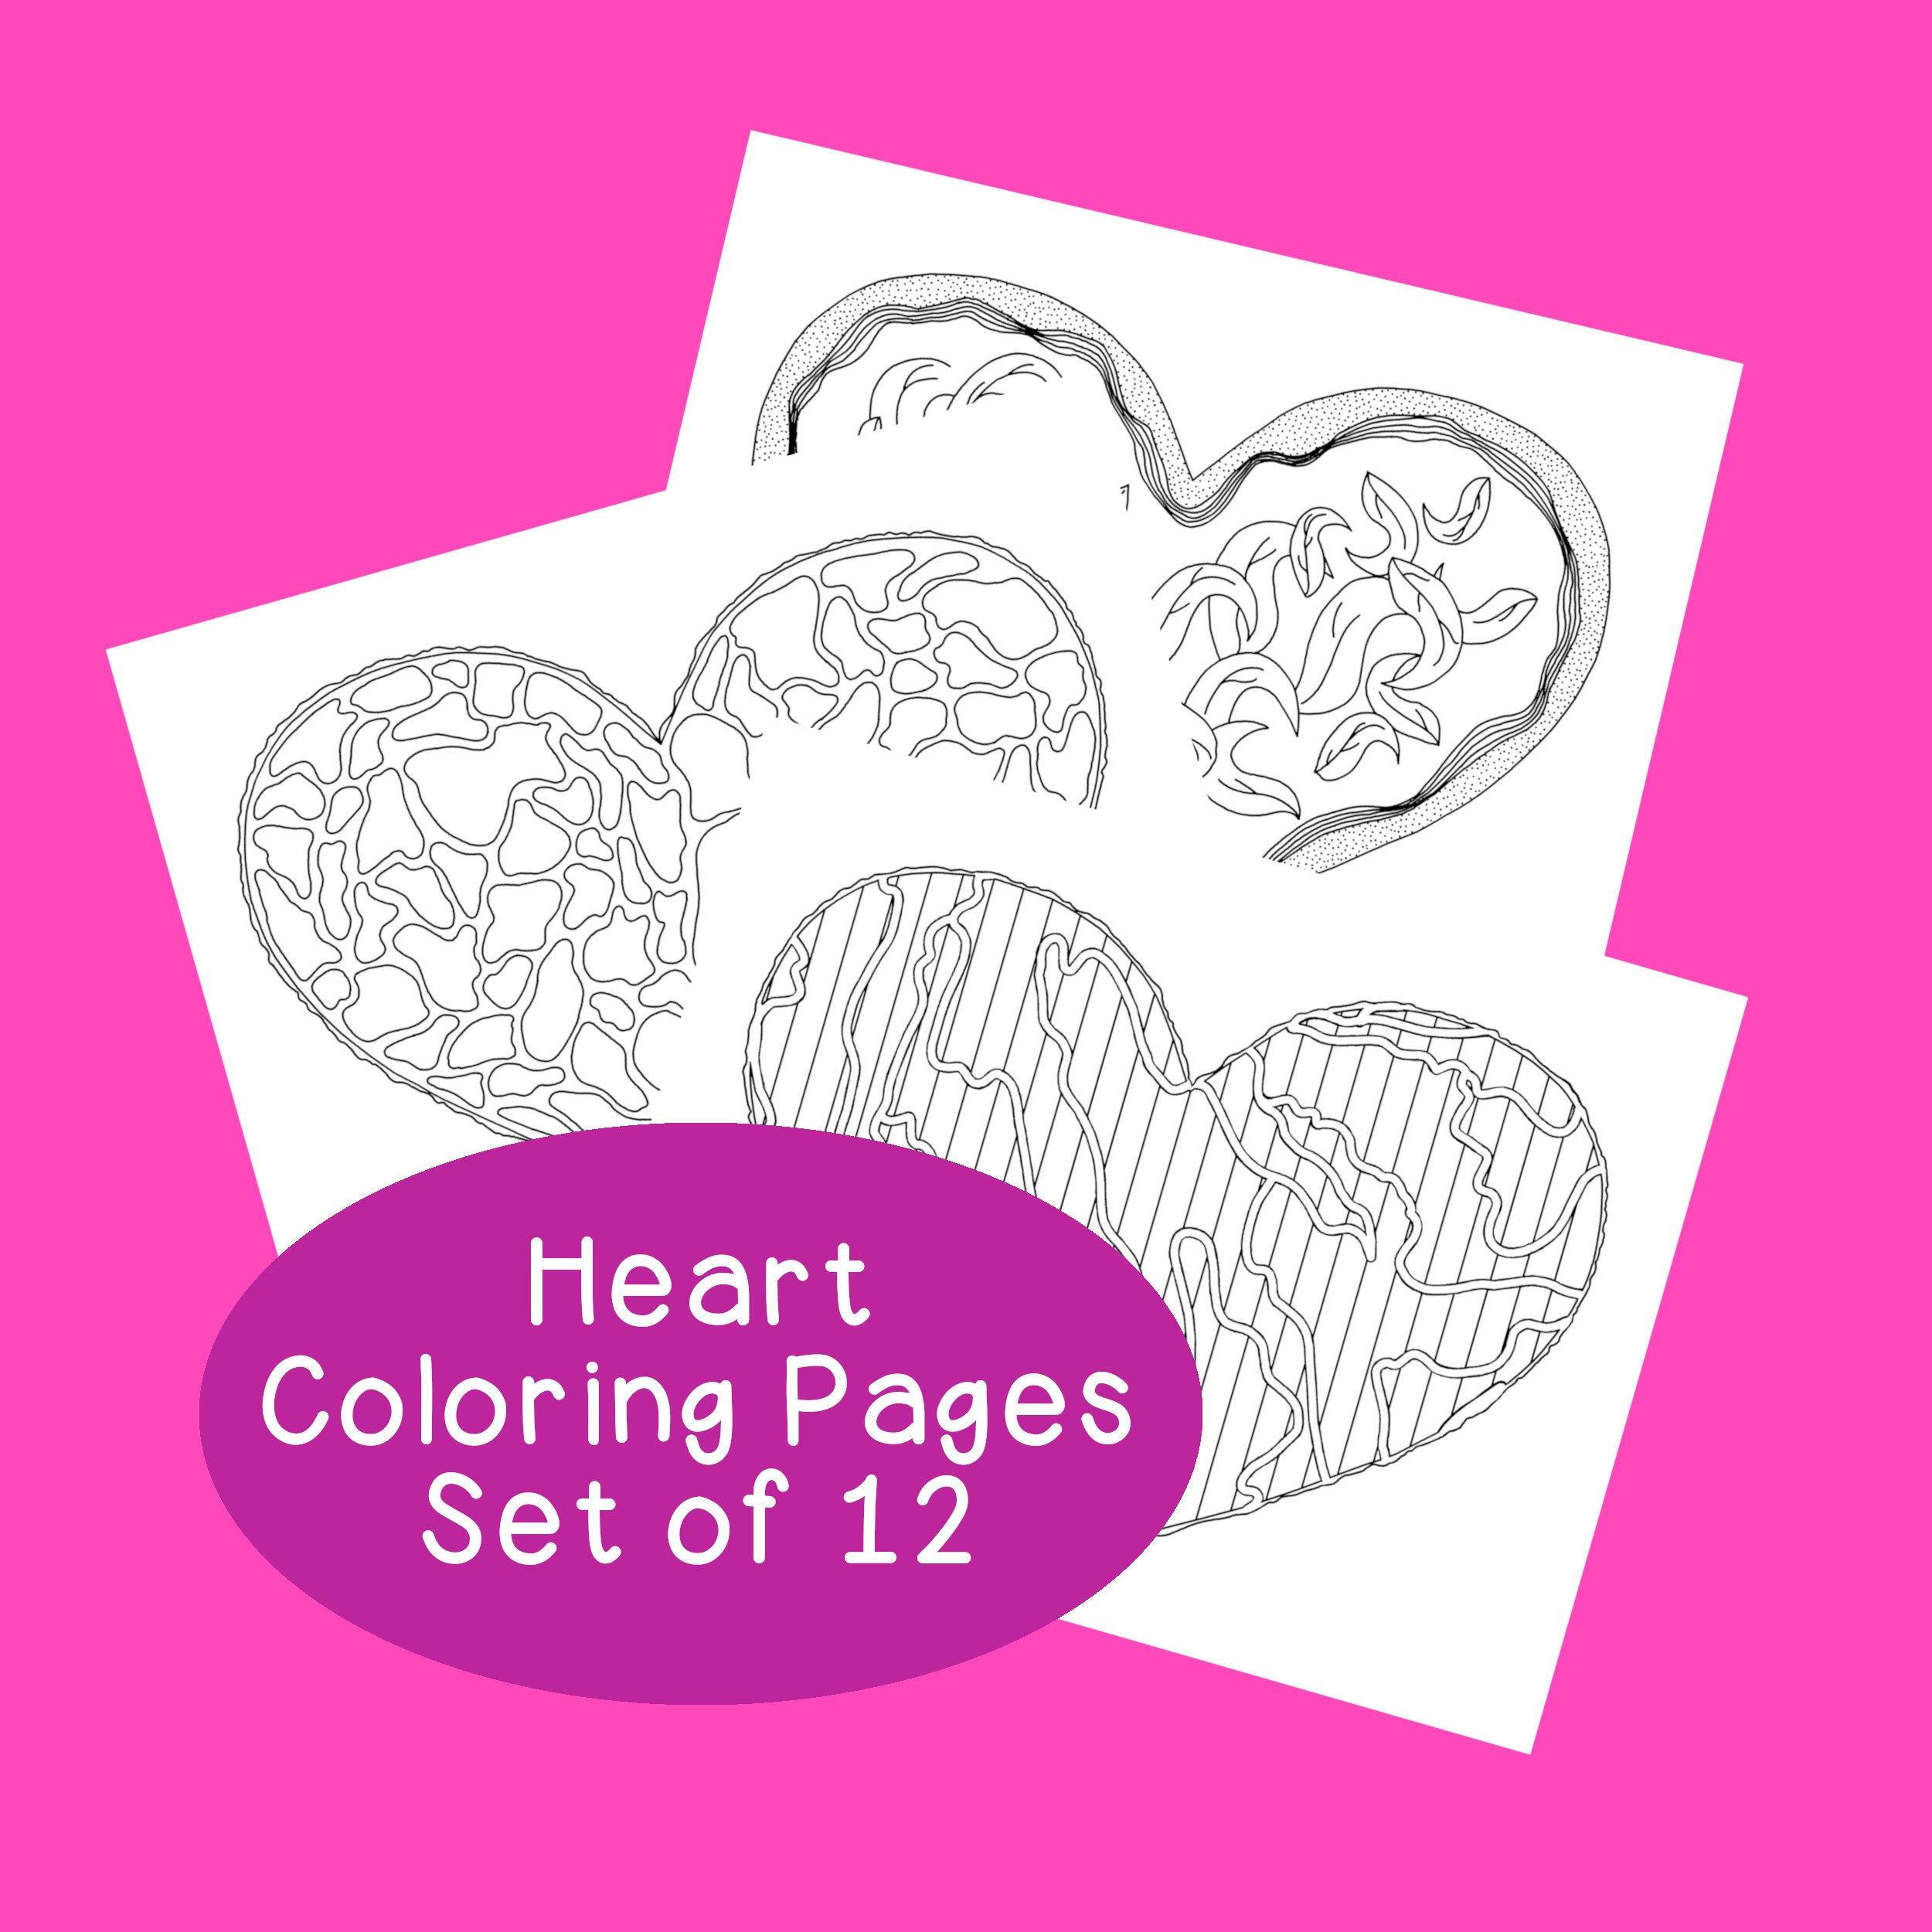 Heart Coloring Pages Pdf Heart Valentines Day Printable Adult Coloring Pages Pdf Set Of Twelve